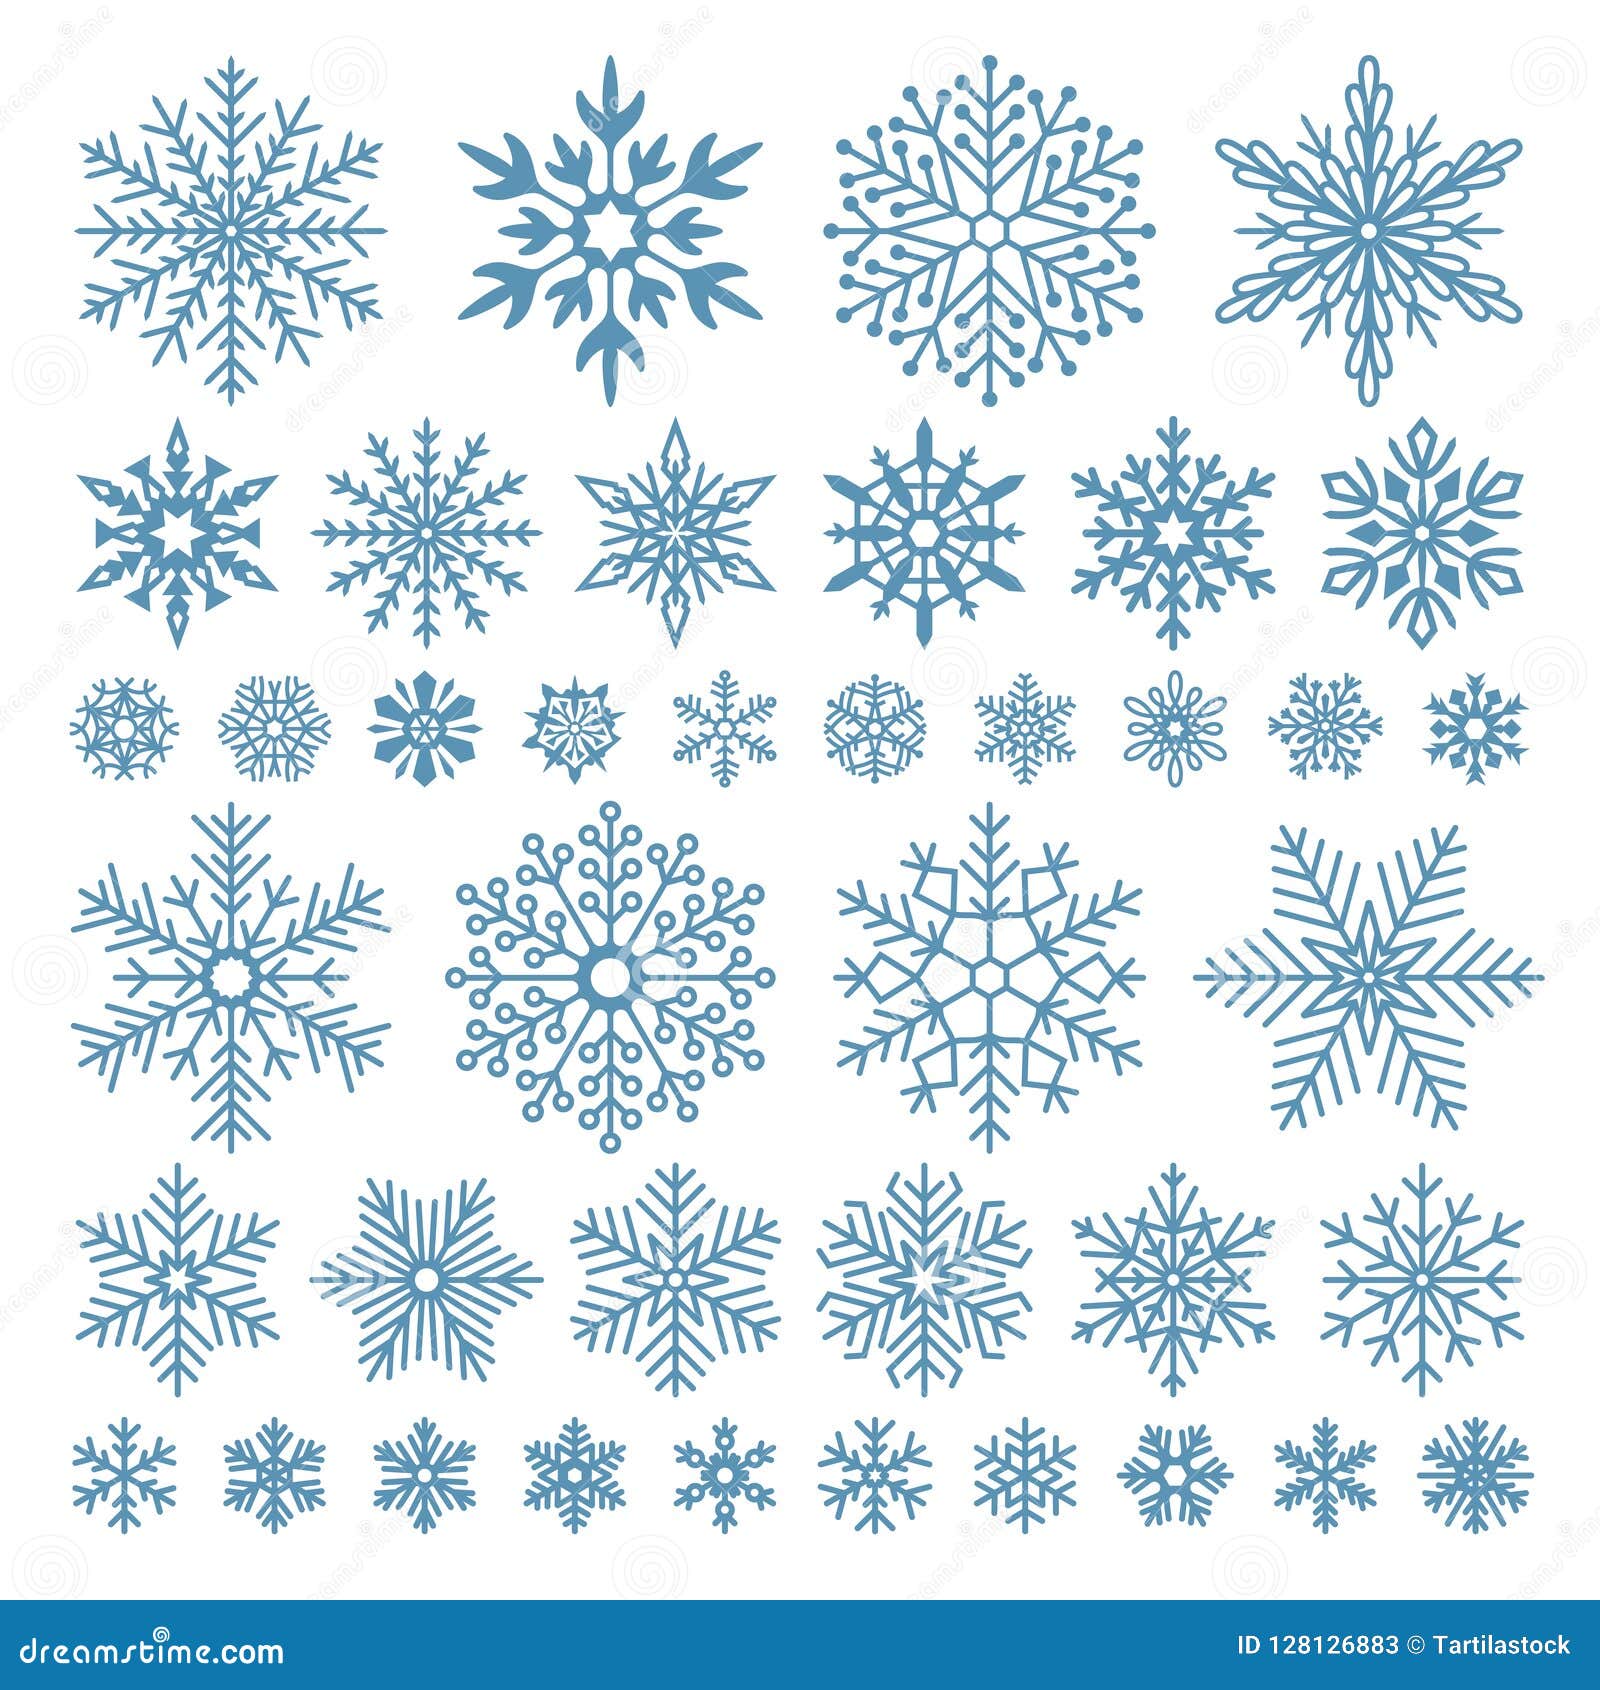 https://thumbs.dreamstime.com/z/flat-snowflakes-winter-snowflake-crystals-christmas-snow-shapes-frosted-cool-blue-icon-cold-xmas-season-frost-snowfall-128126883.jpg